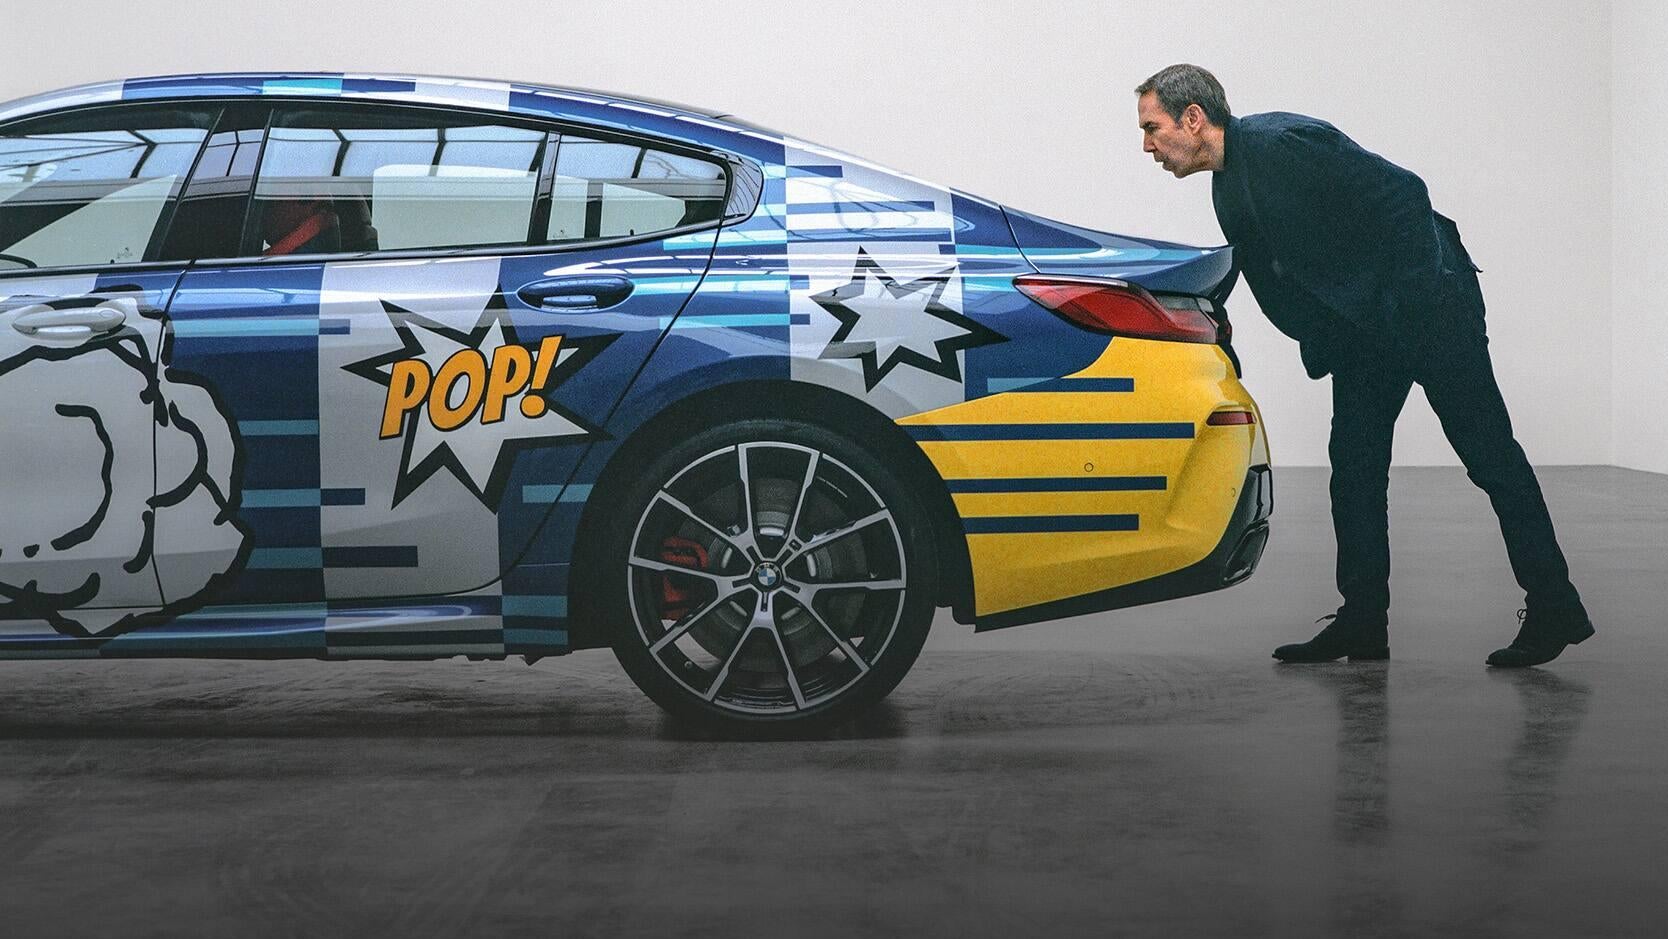 The Latest BMW Art Car Is Trading The Museum Exhibit For The Open Road